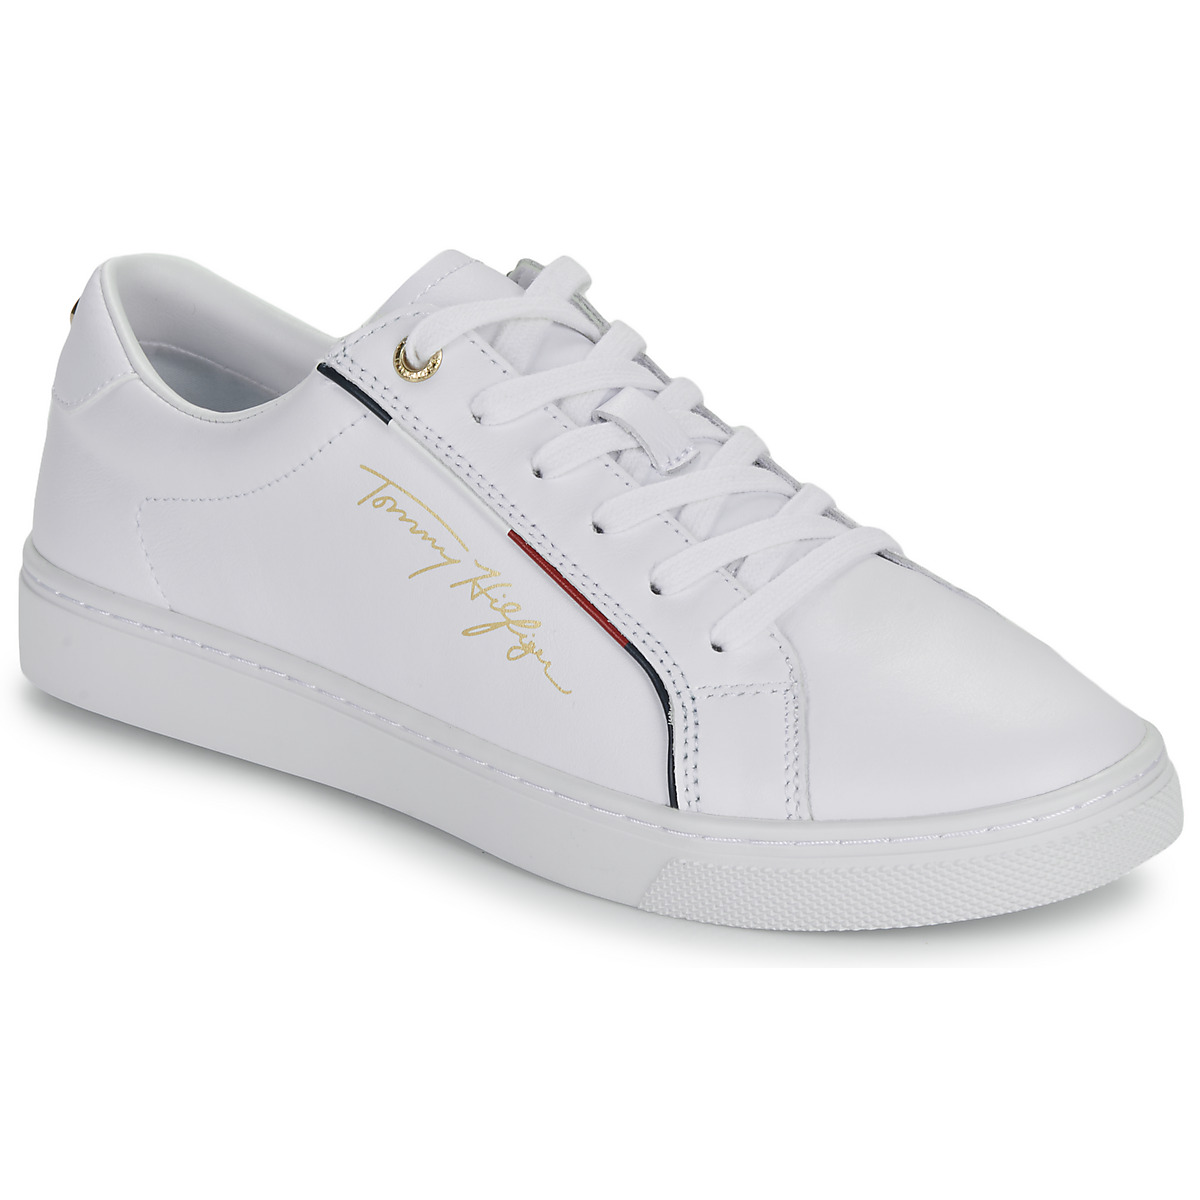 Tommy Hilfiger Blanc TOMMY HILFIGER SIGNATURE SNEAKER NYsFPJuH